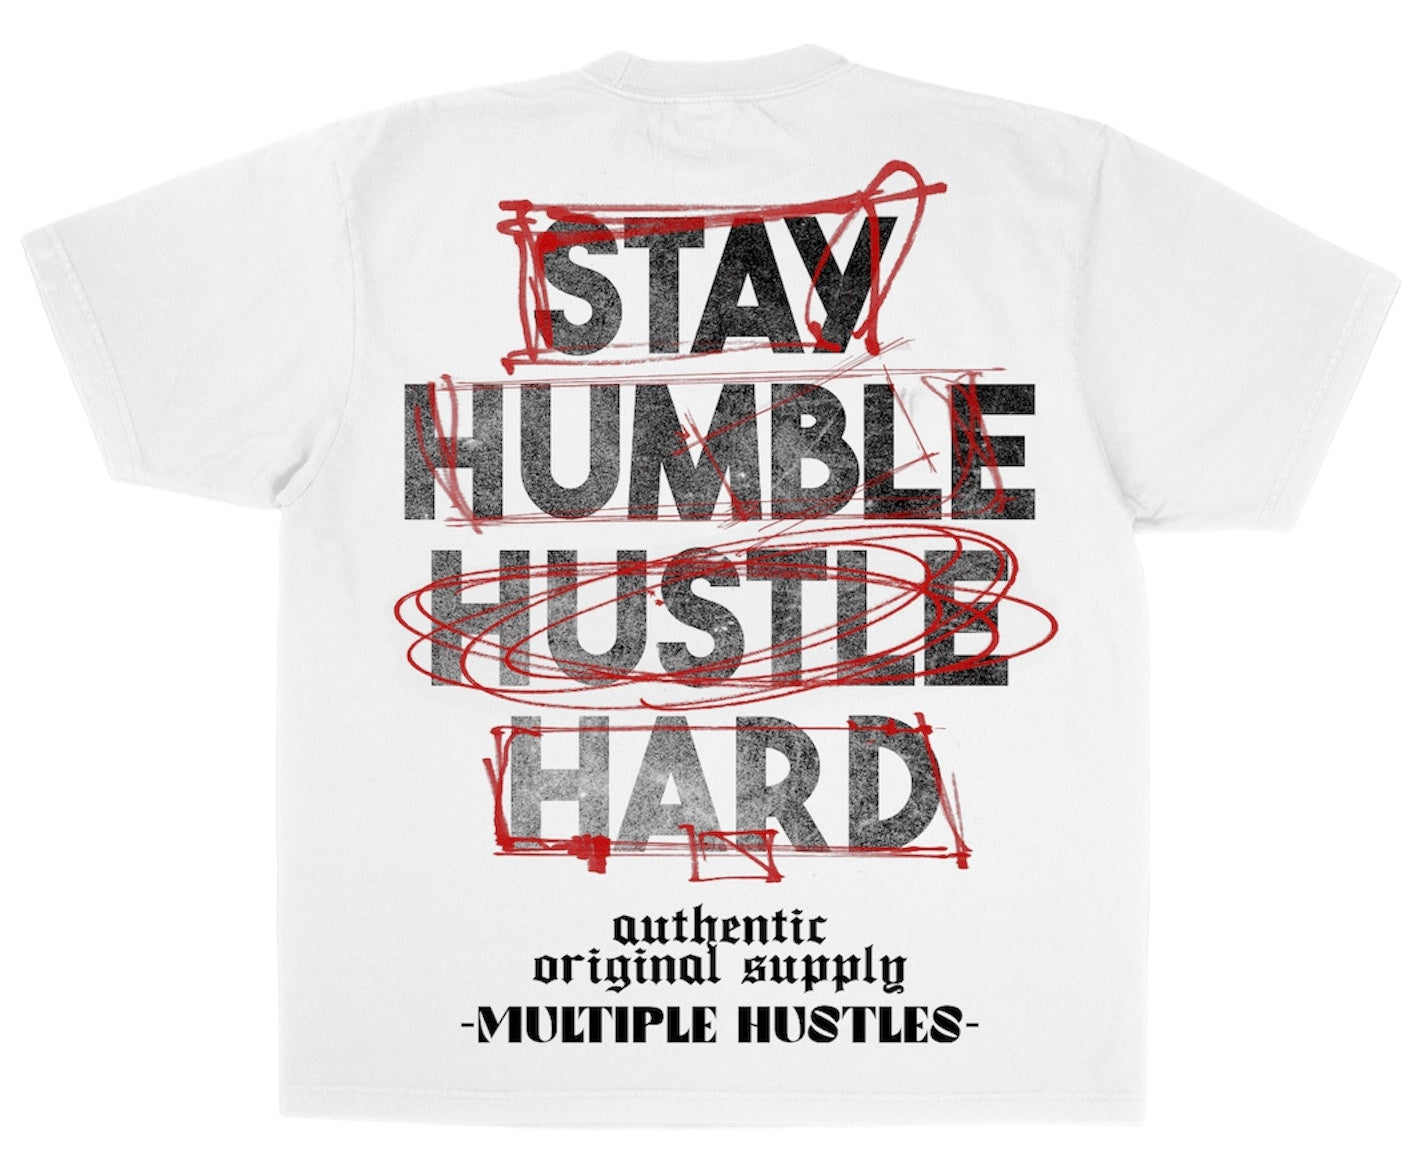 The Hustle Hard Collection White T-Shirt